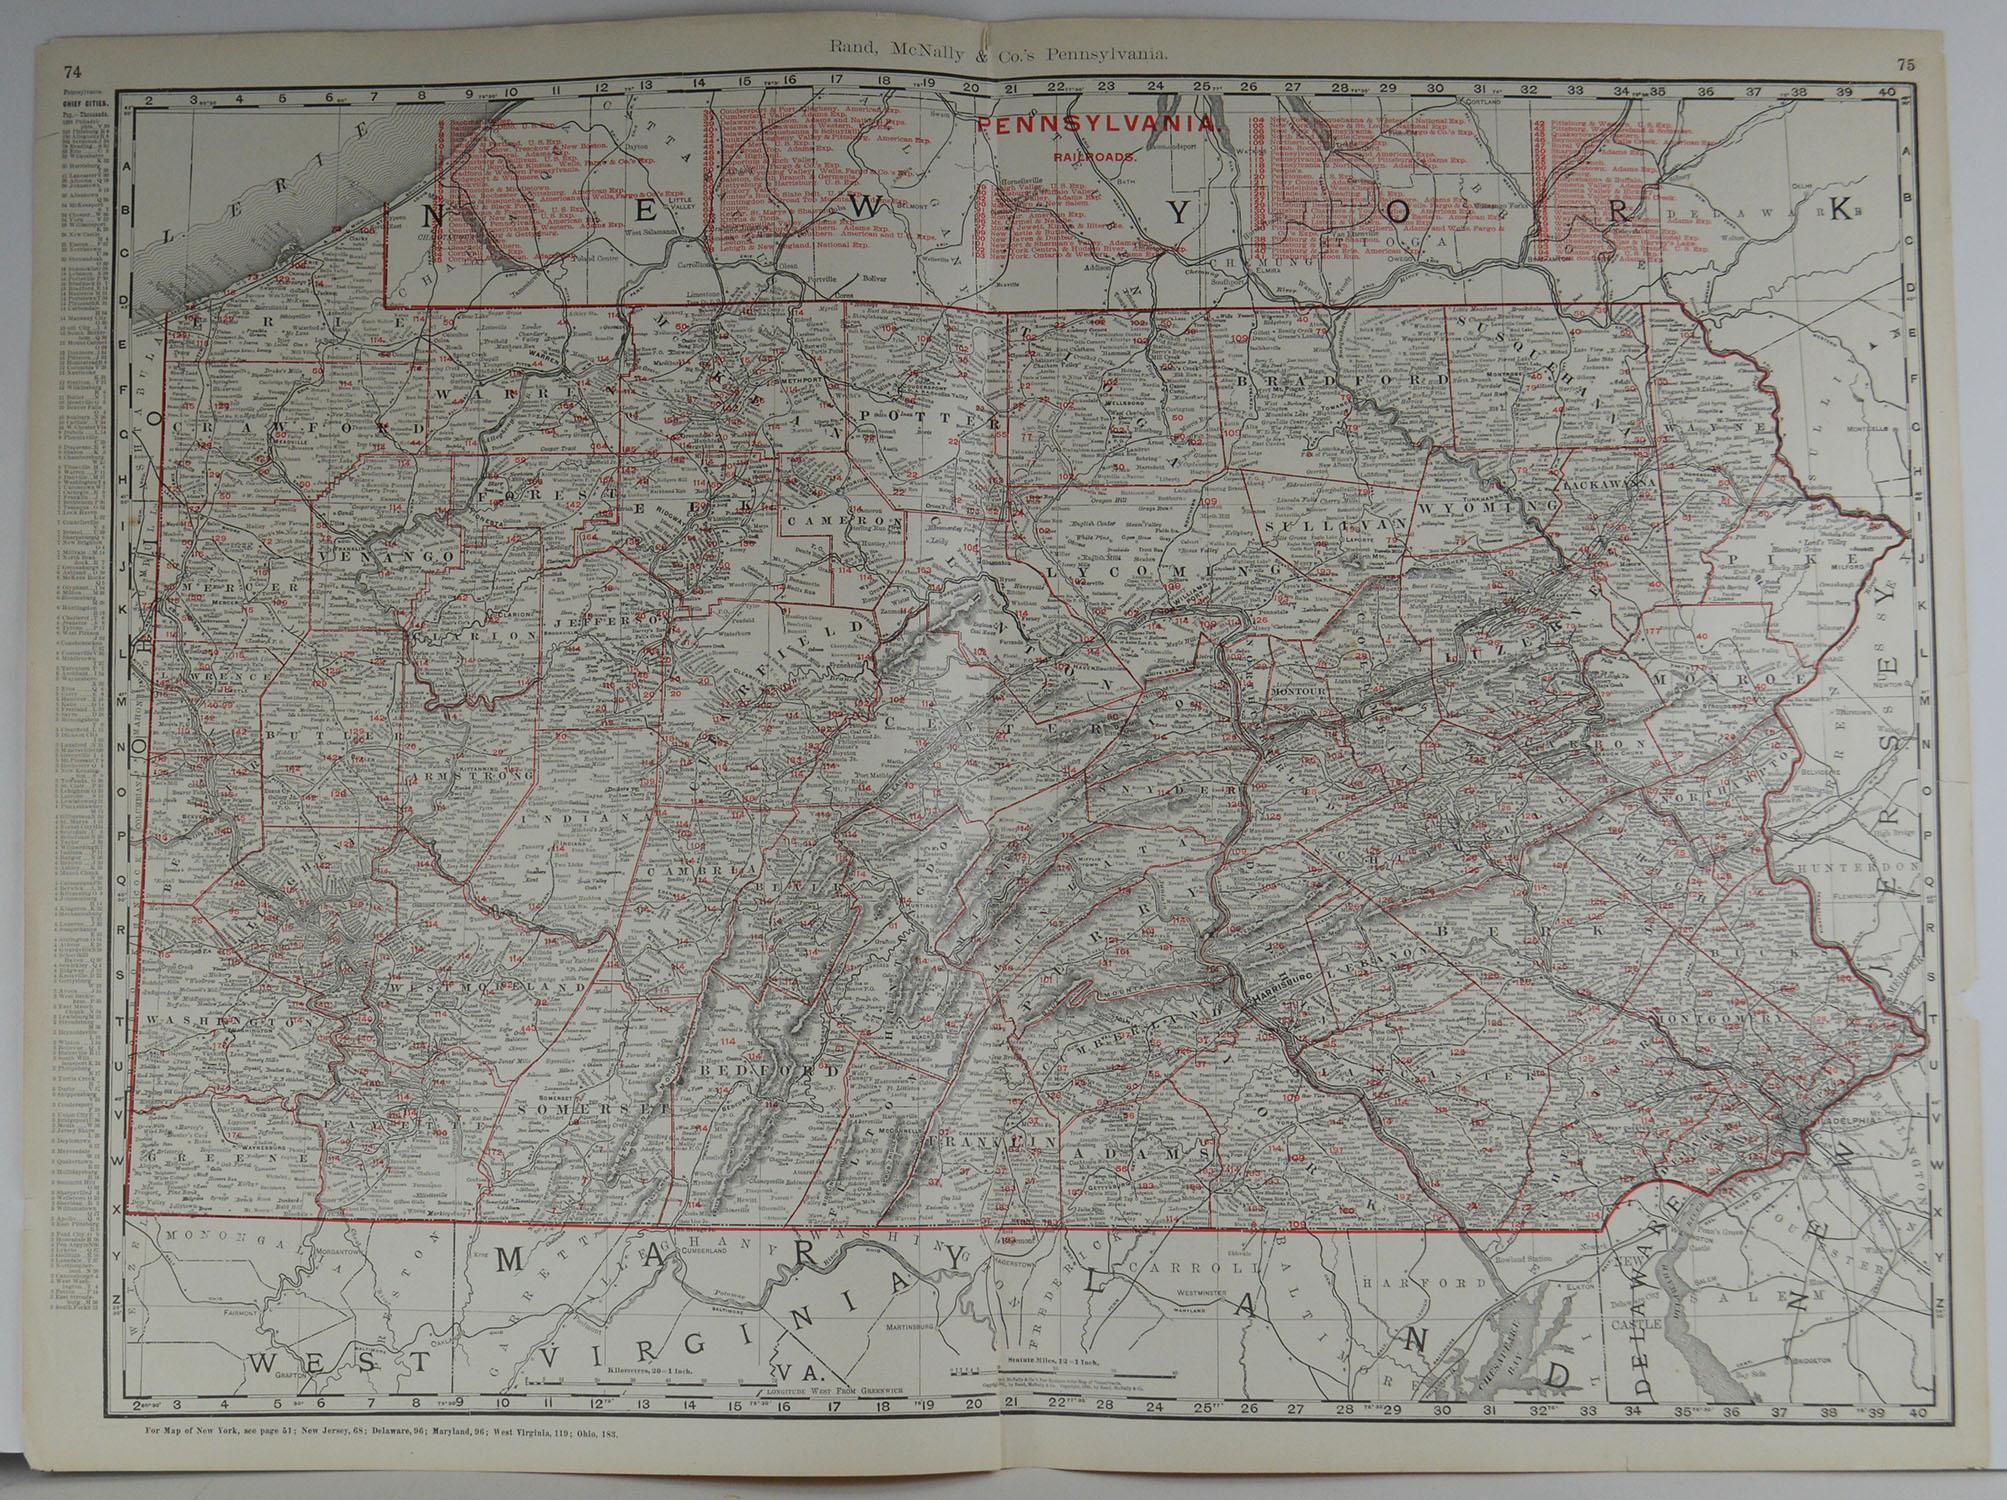 Fabulous monochrome map with red outline color.

Original color

By Rand, McNally & Co.

Published, circa 1900

Unframed

Minor edge tears and slight paper loss on right margin.